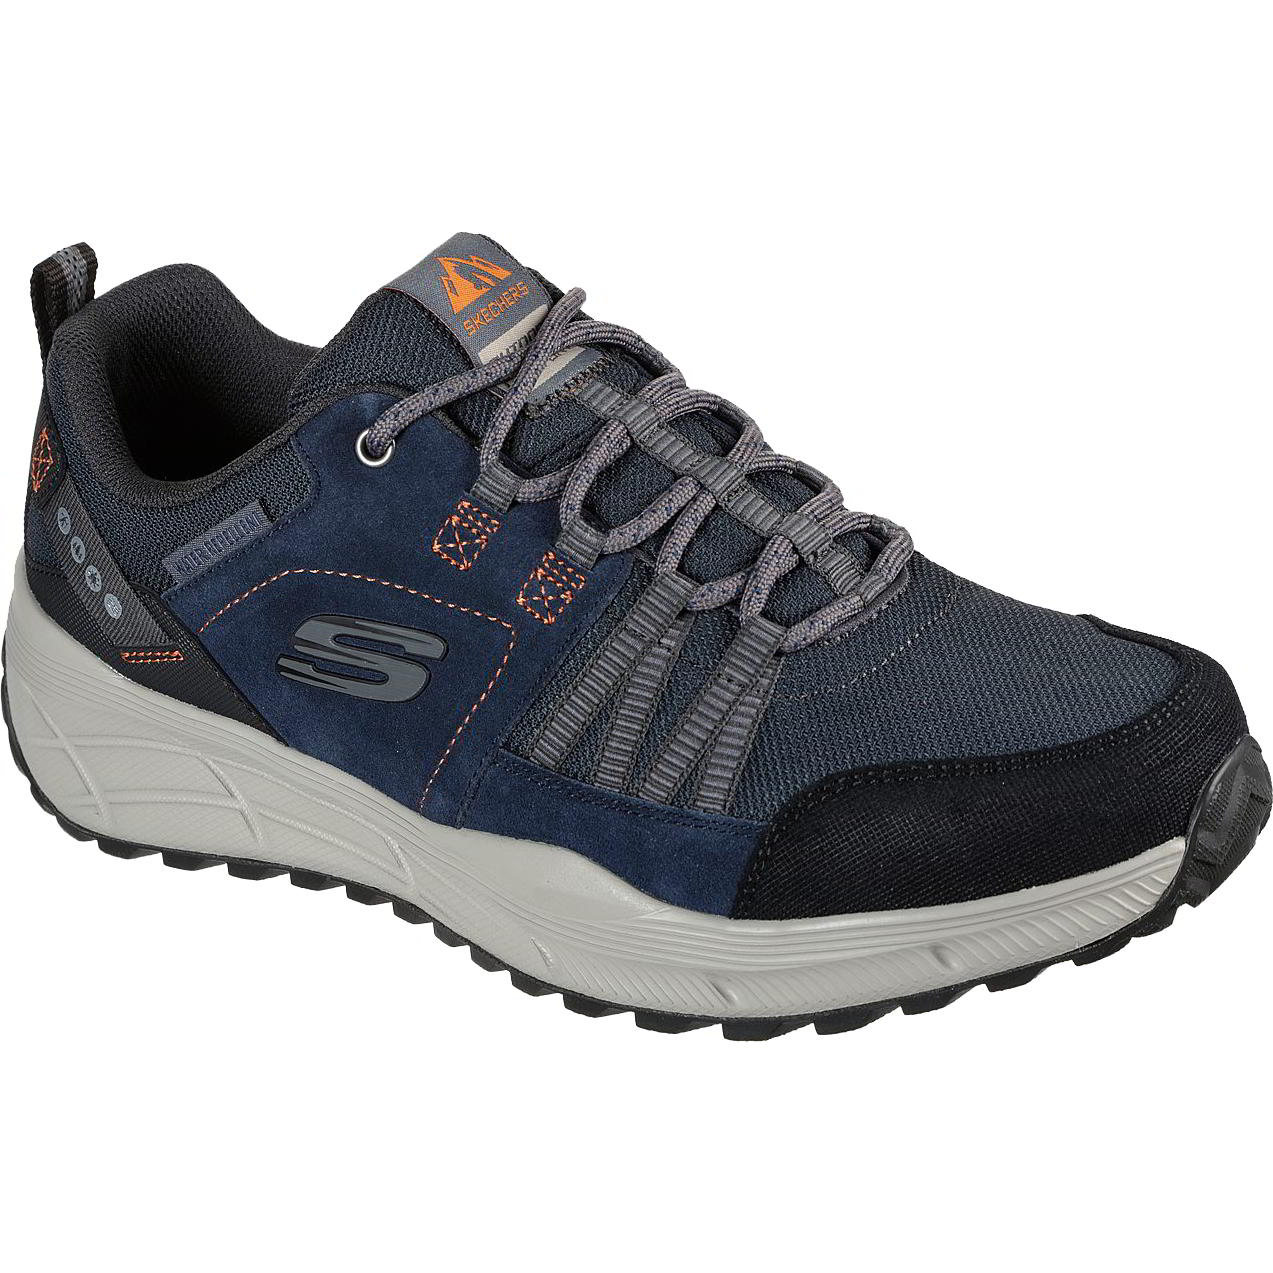 Skechers Men's Equalizer 4.0 Trail TRX Trainers - Navy